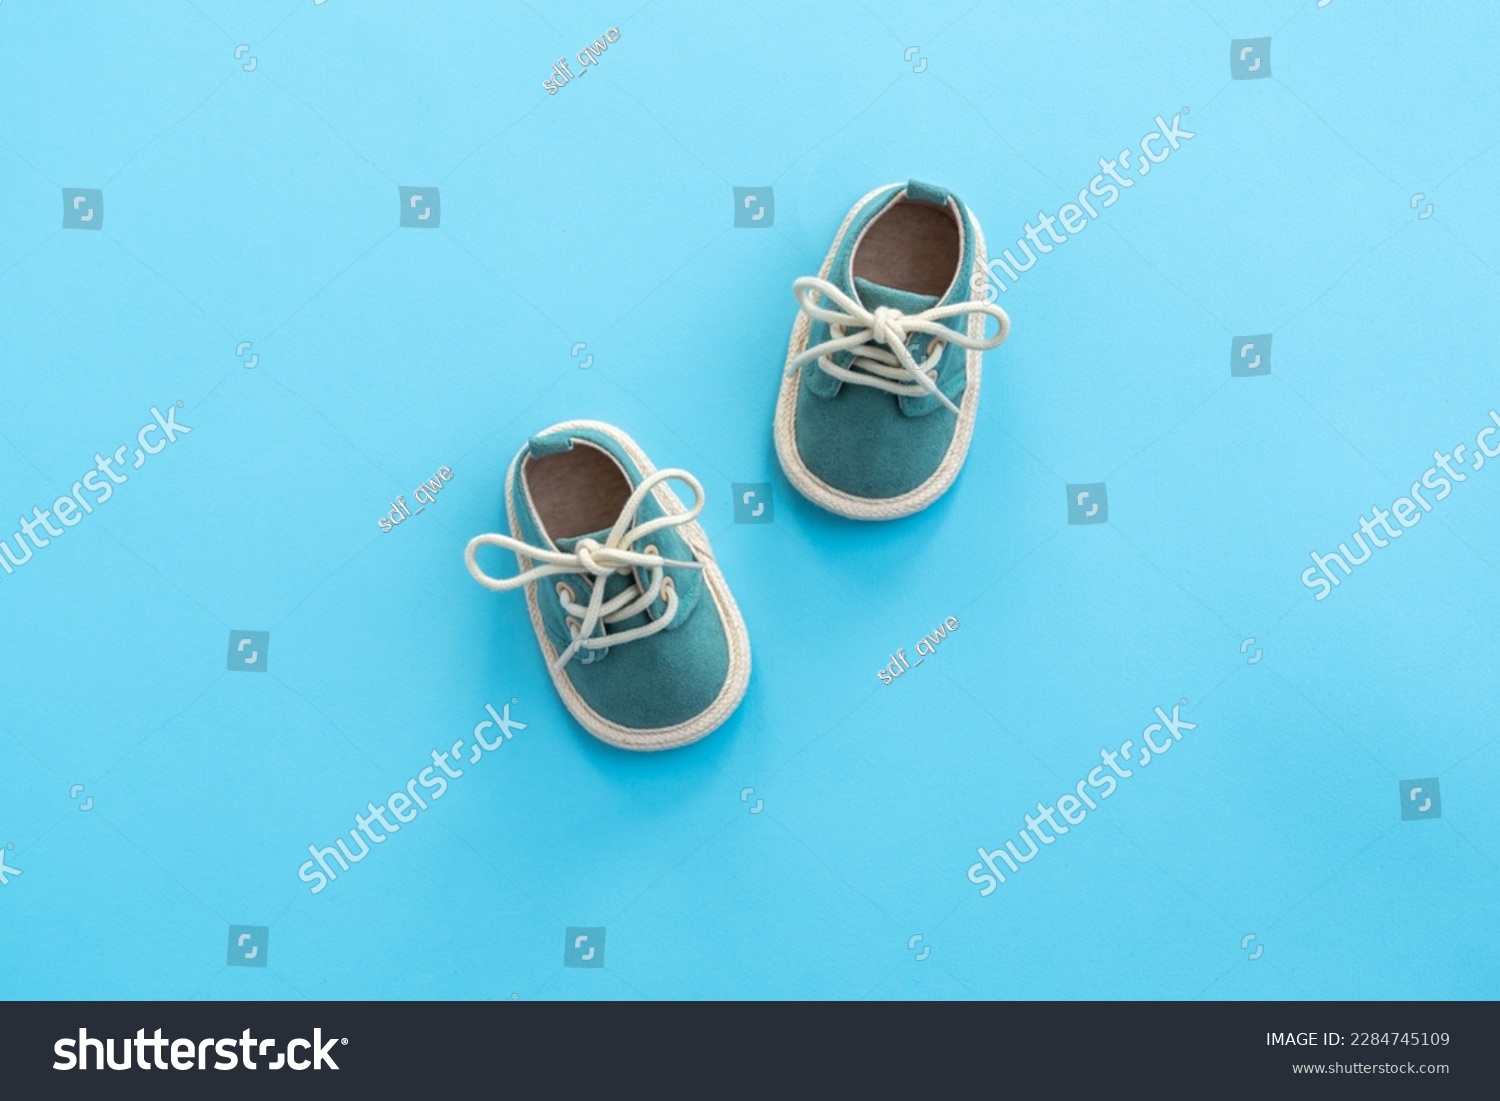 Baby shoes on paper background with copy space. Baby clothes concept. Top view, flat lay #2284745109